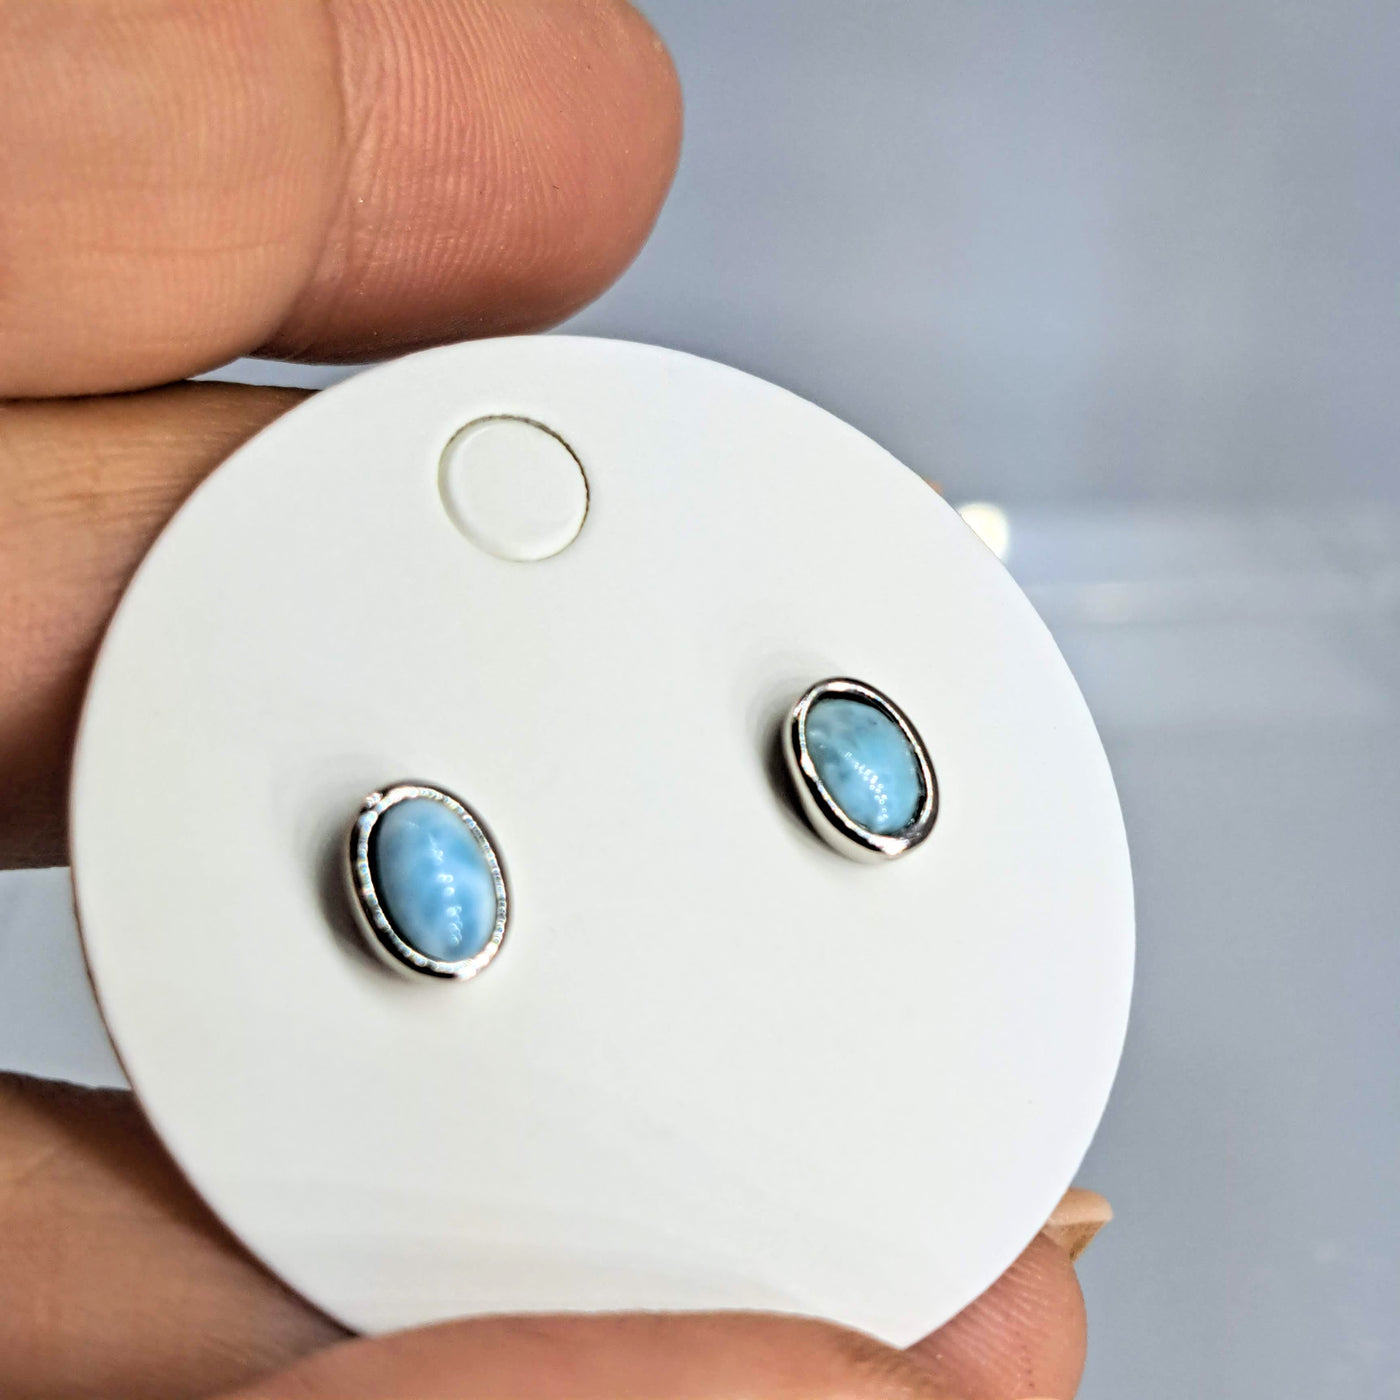 "Ocean" Tiny Stud Earrings - Larimar, Round or Ovals In Sterling or Gold Sterling